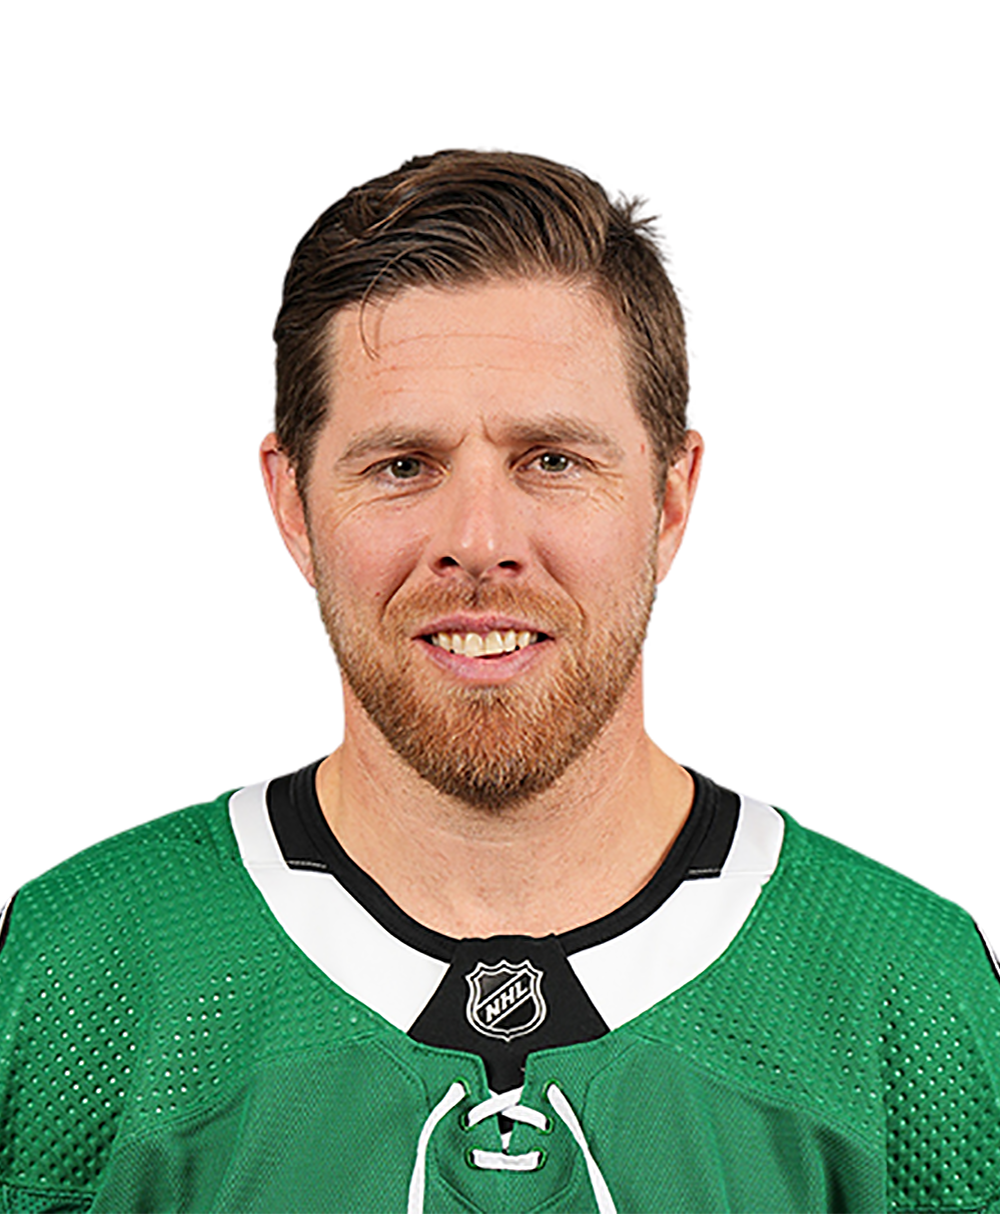 Polish American Celebs - Joe Pavelski (July 11, 1984) Joseph Pavelski is a  professional hockey player now playing for the San Jose Sharks. He scored a  goal in his first NHL game